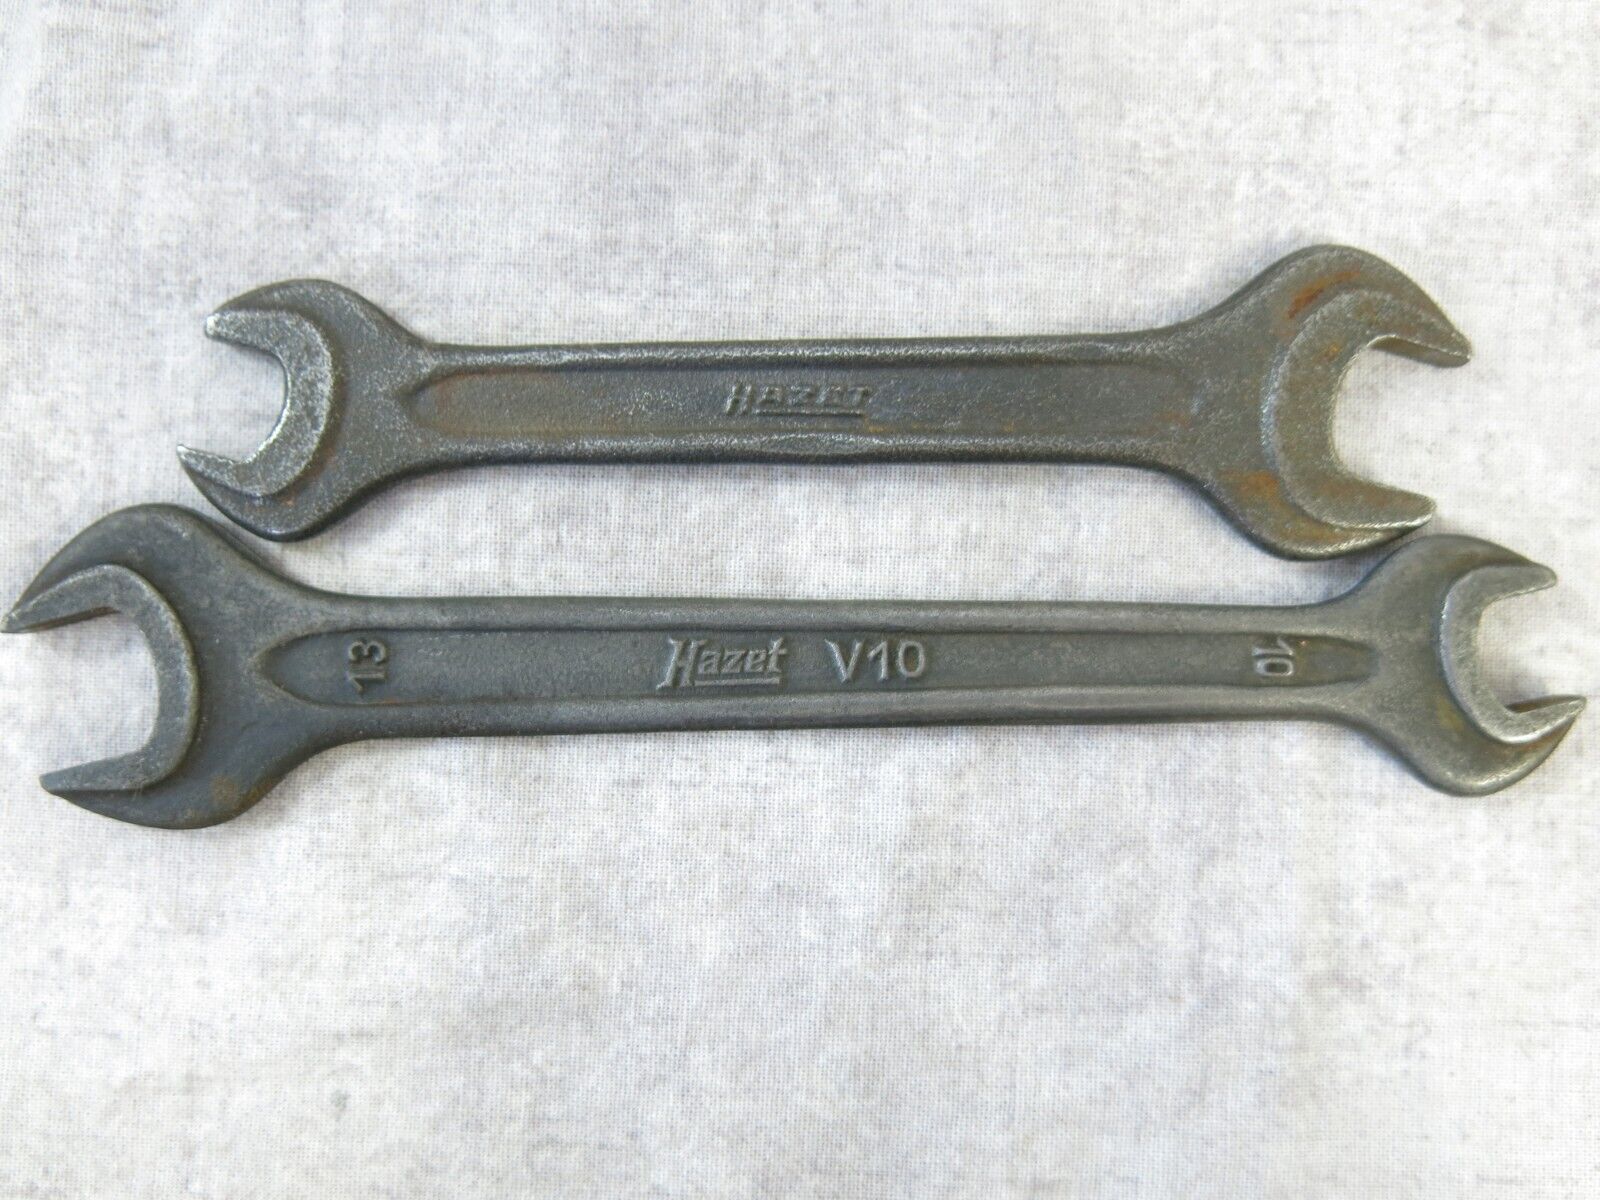 Two Vintage Hazet Wrenches Both 13mm/10mm Double Open End DIN 895 & V10